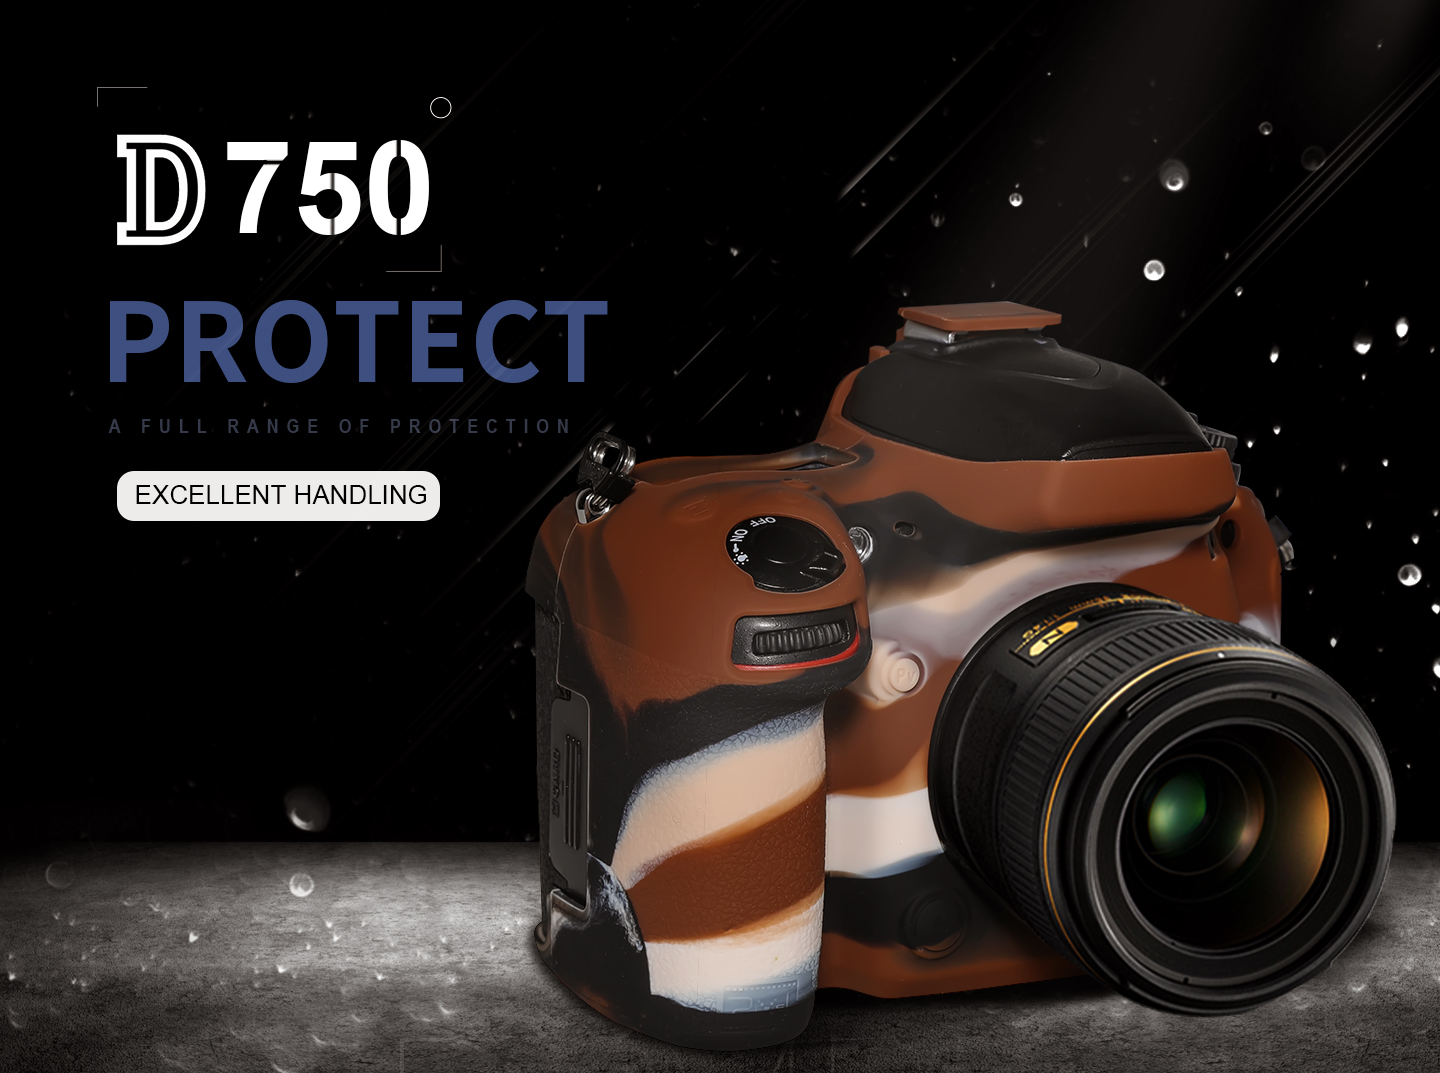 D750 PROTECT, A FULL RANGE OF PROTECTION